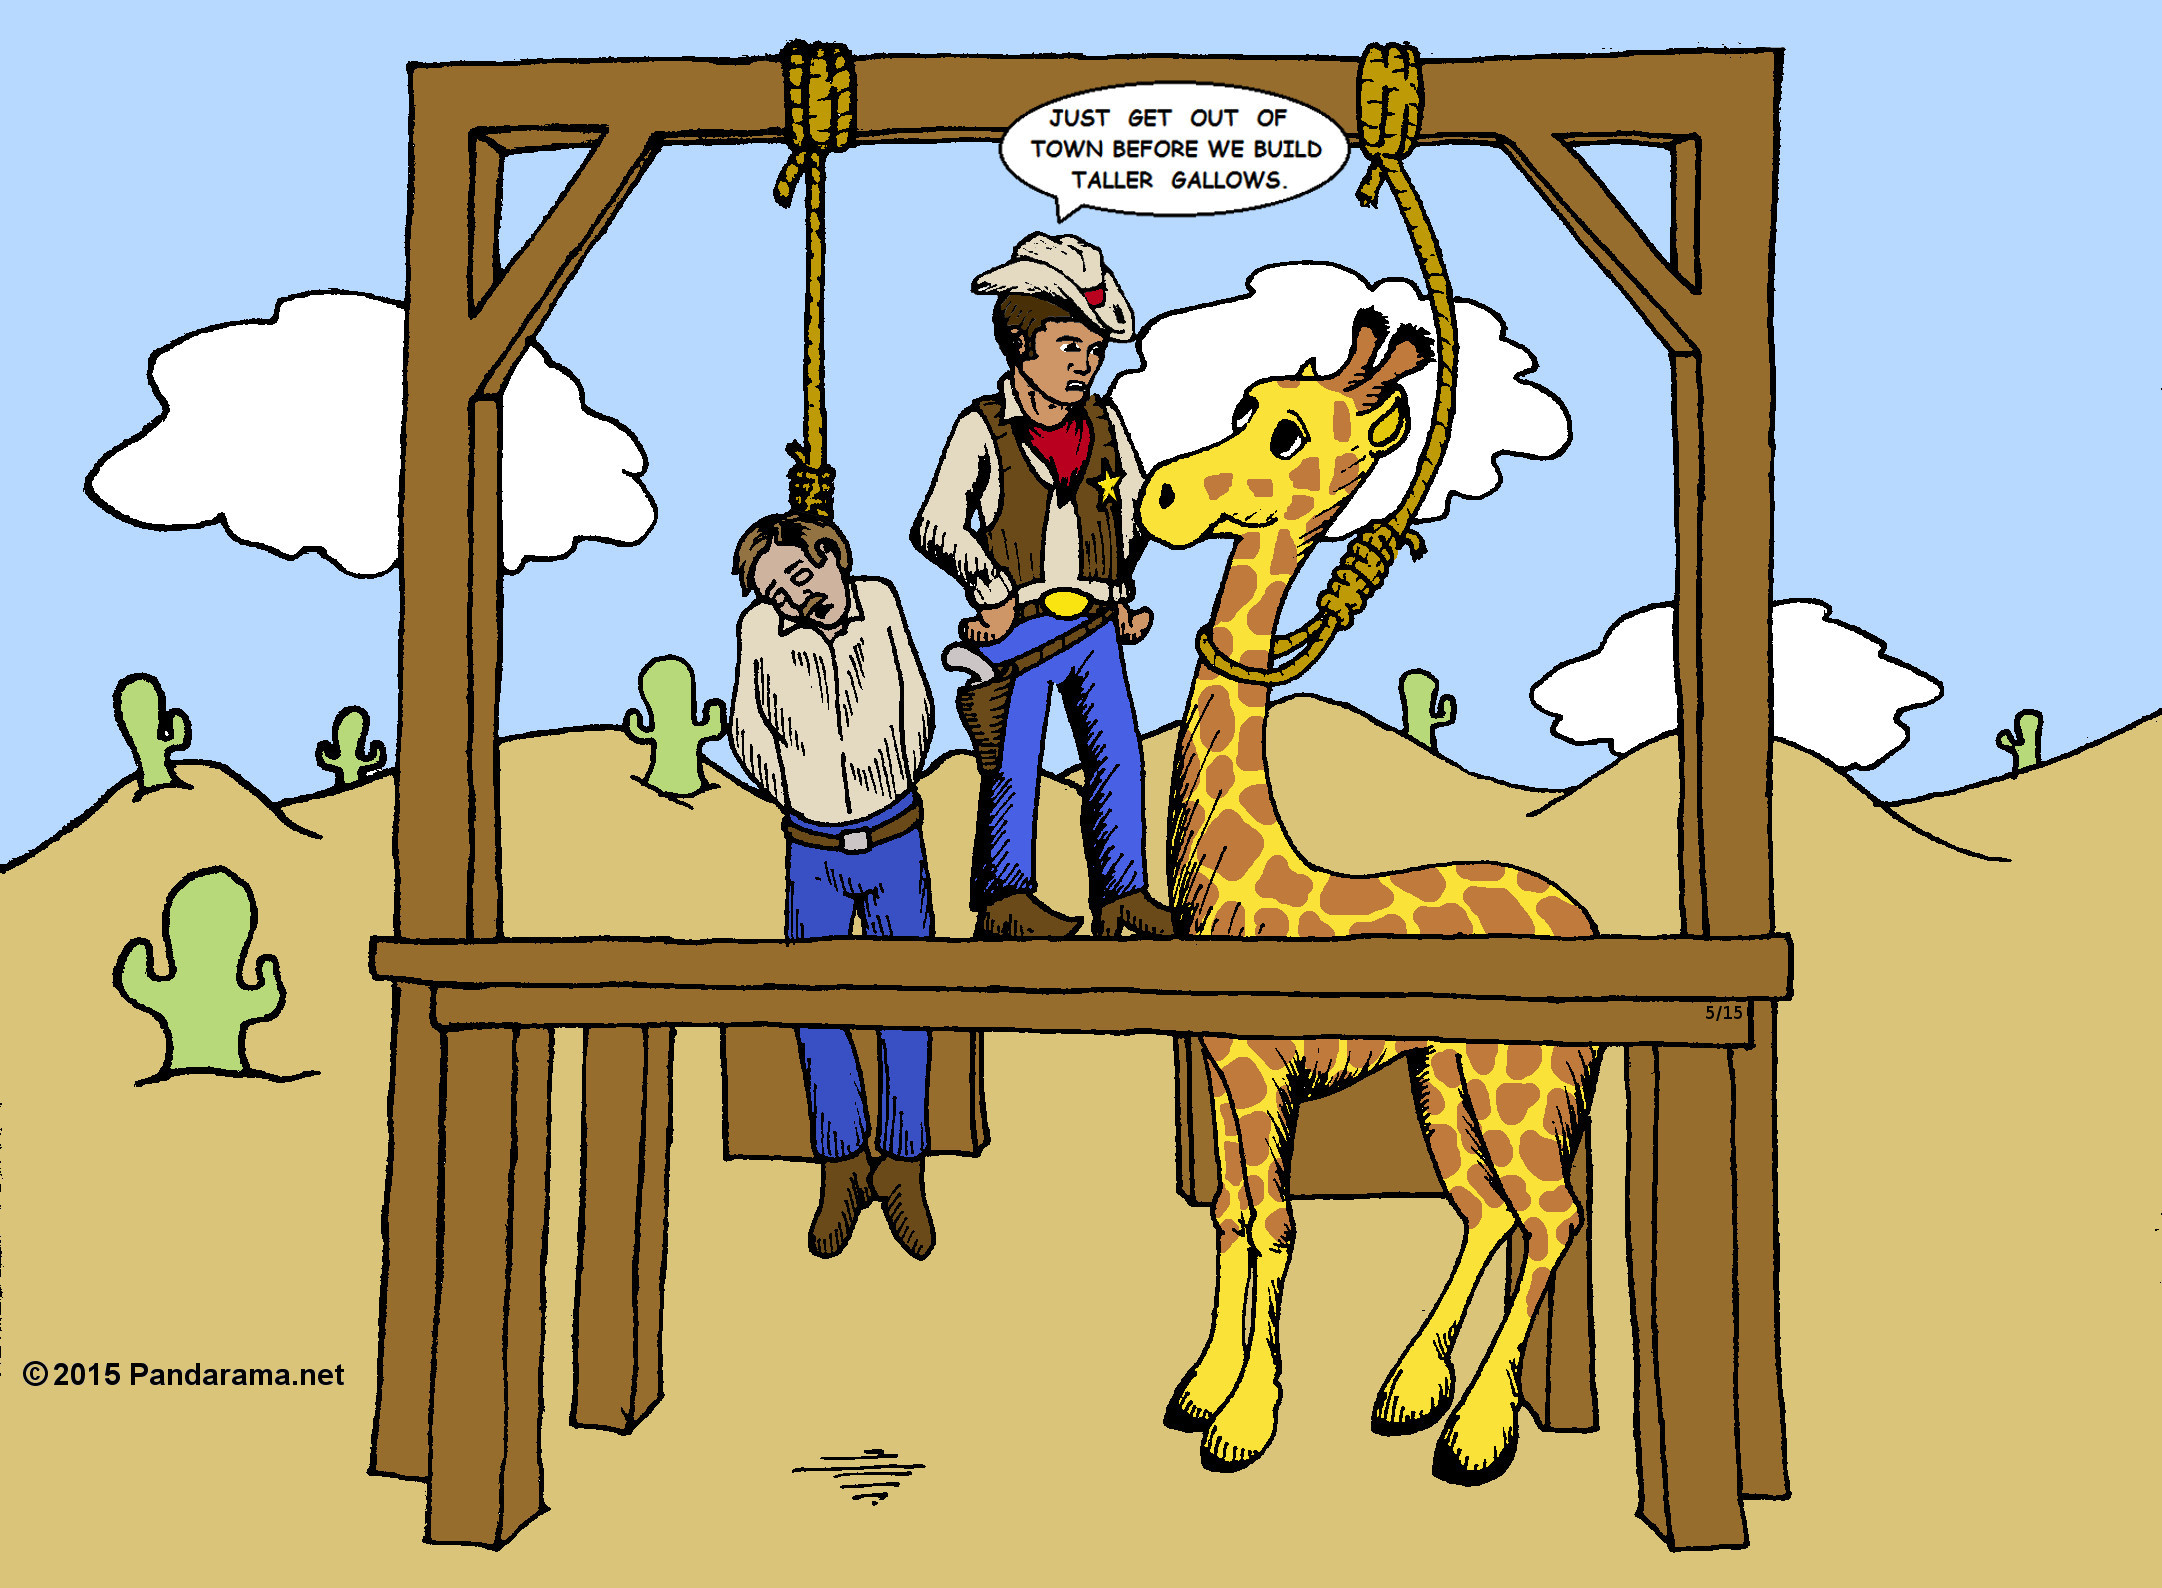 An Old West sheriff attempts to hand a giraffe, but the giraffe is too tall.